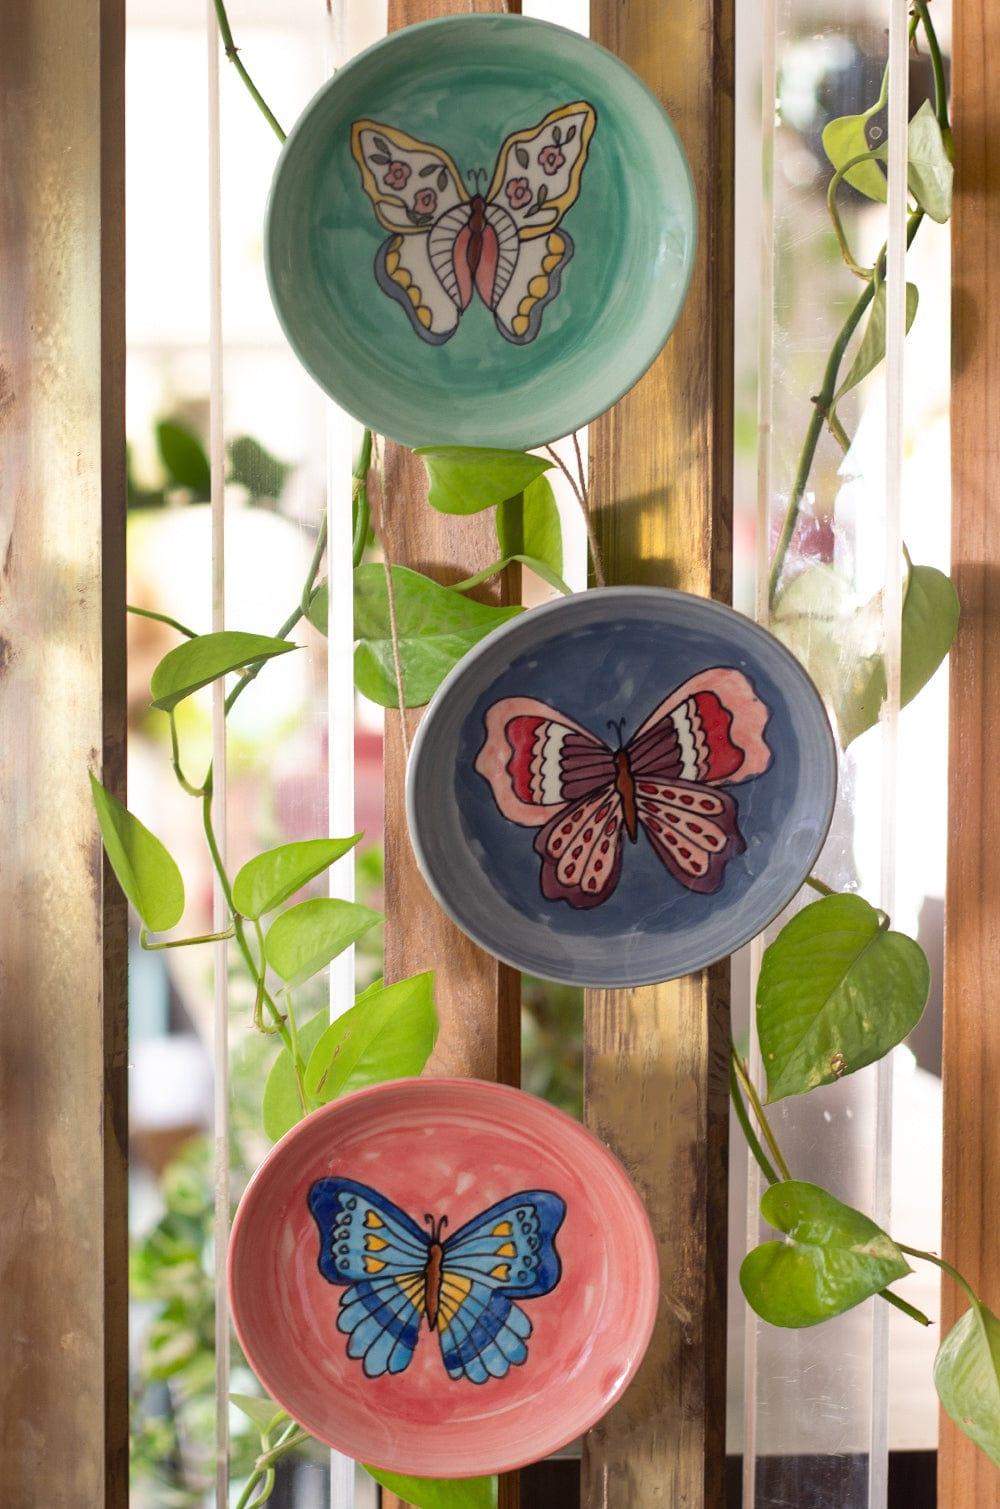 Butterflies  Wall Plates - Set Of 3 -handpainted StonewareLooking for a fun and colorful way to brighten up your home? Check out our Wishing Chair butterfly wall plates! Handpainted in ceramic, these beautiful butterfly plaButterflies Wall Plates - SetThe Wishing Chair